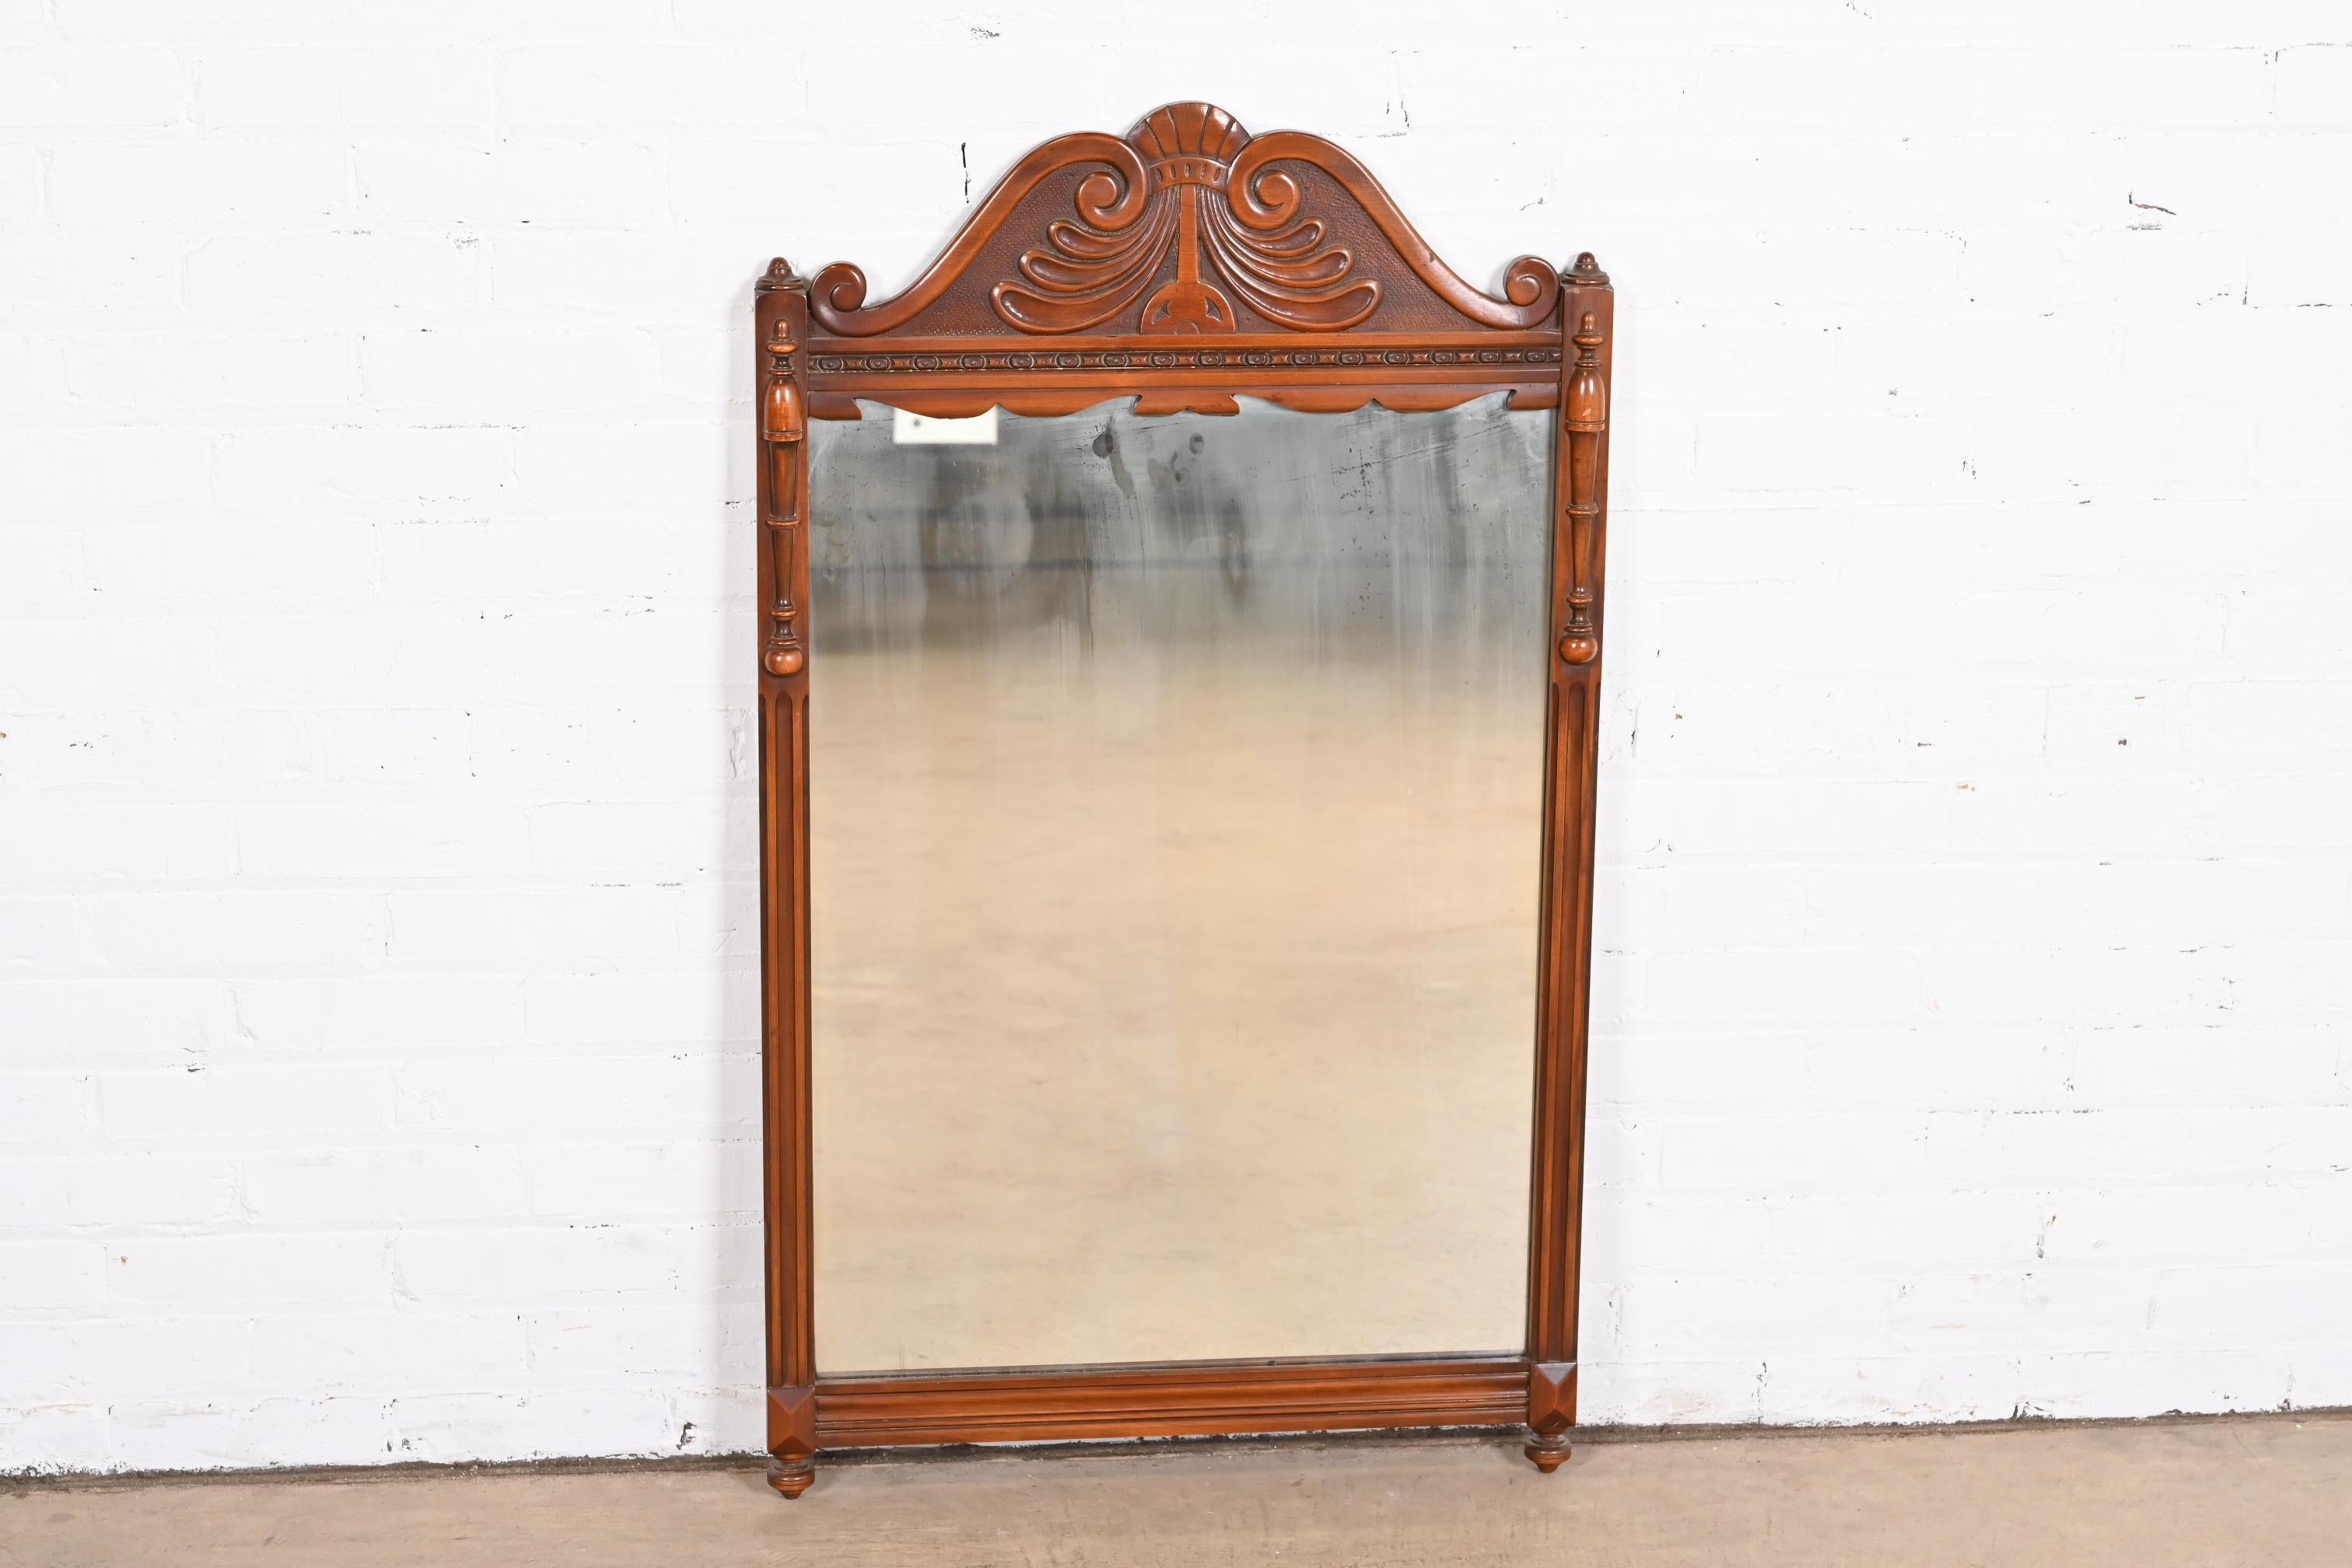 20th Century French Art Deco Carved Walnut Wall Mirror by Landstrom, Circa 1940s For Sale